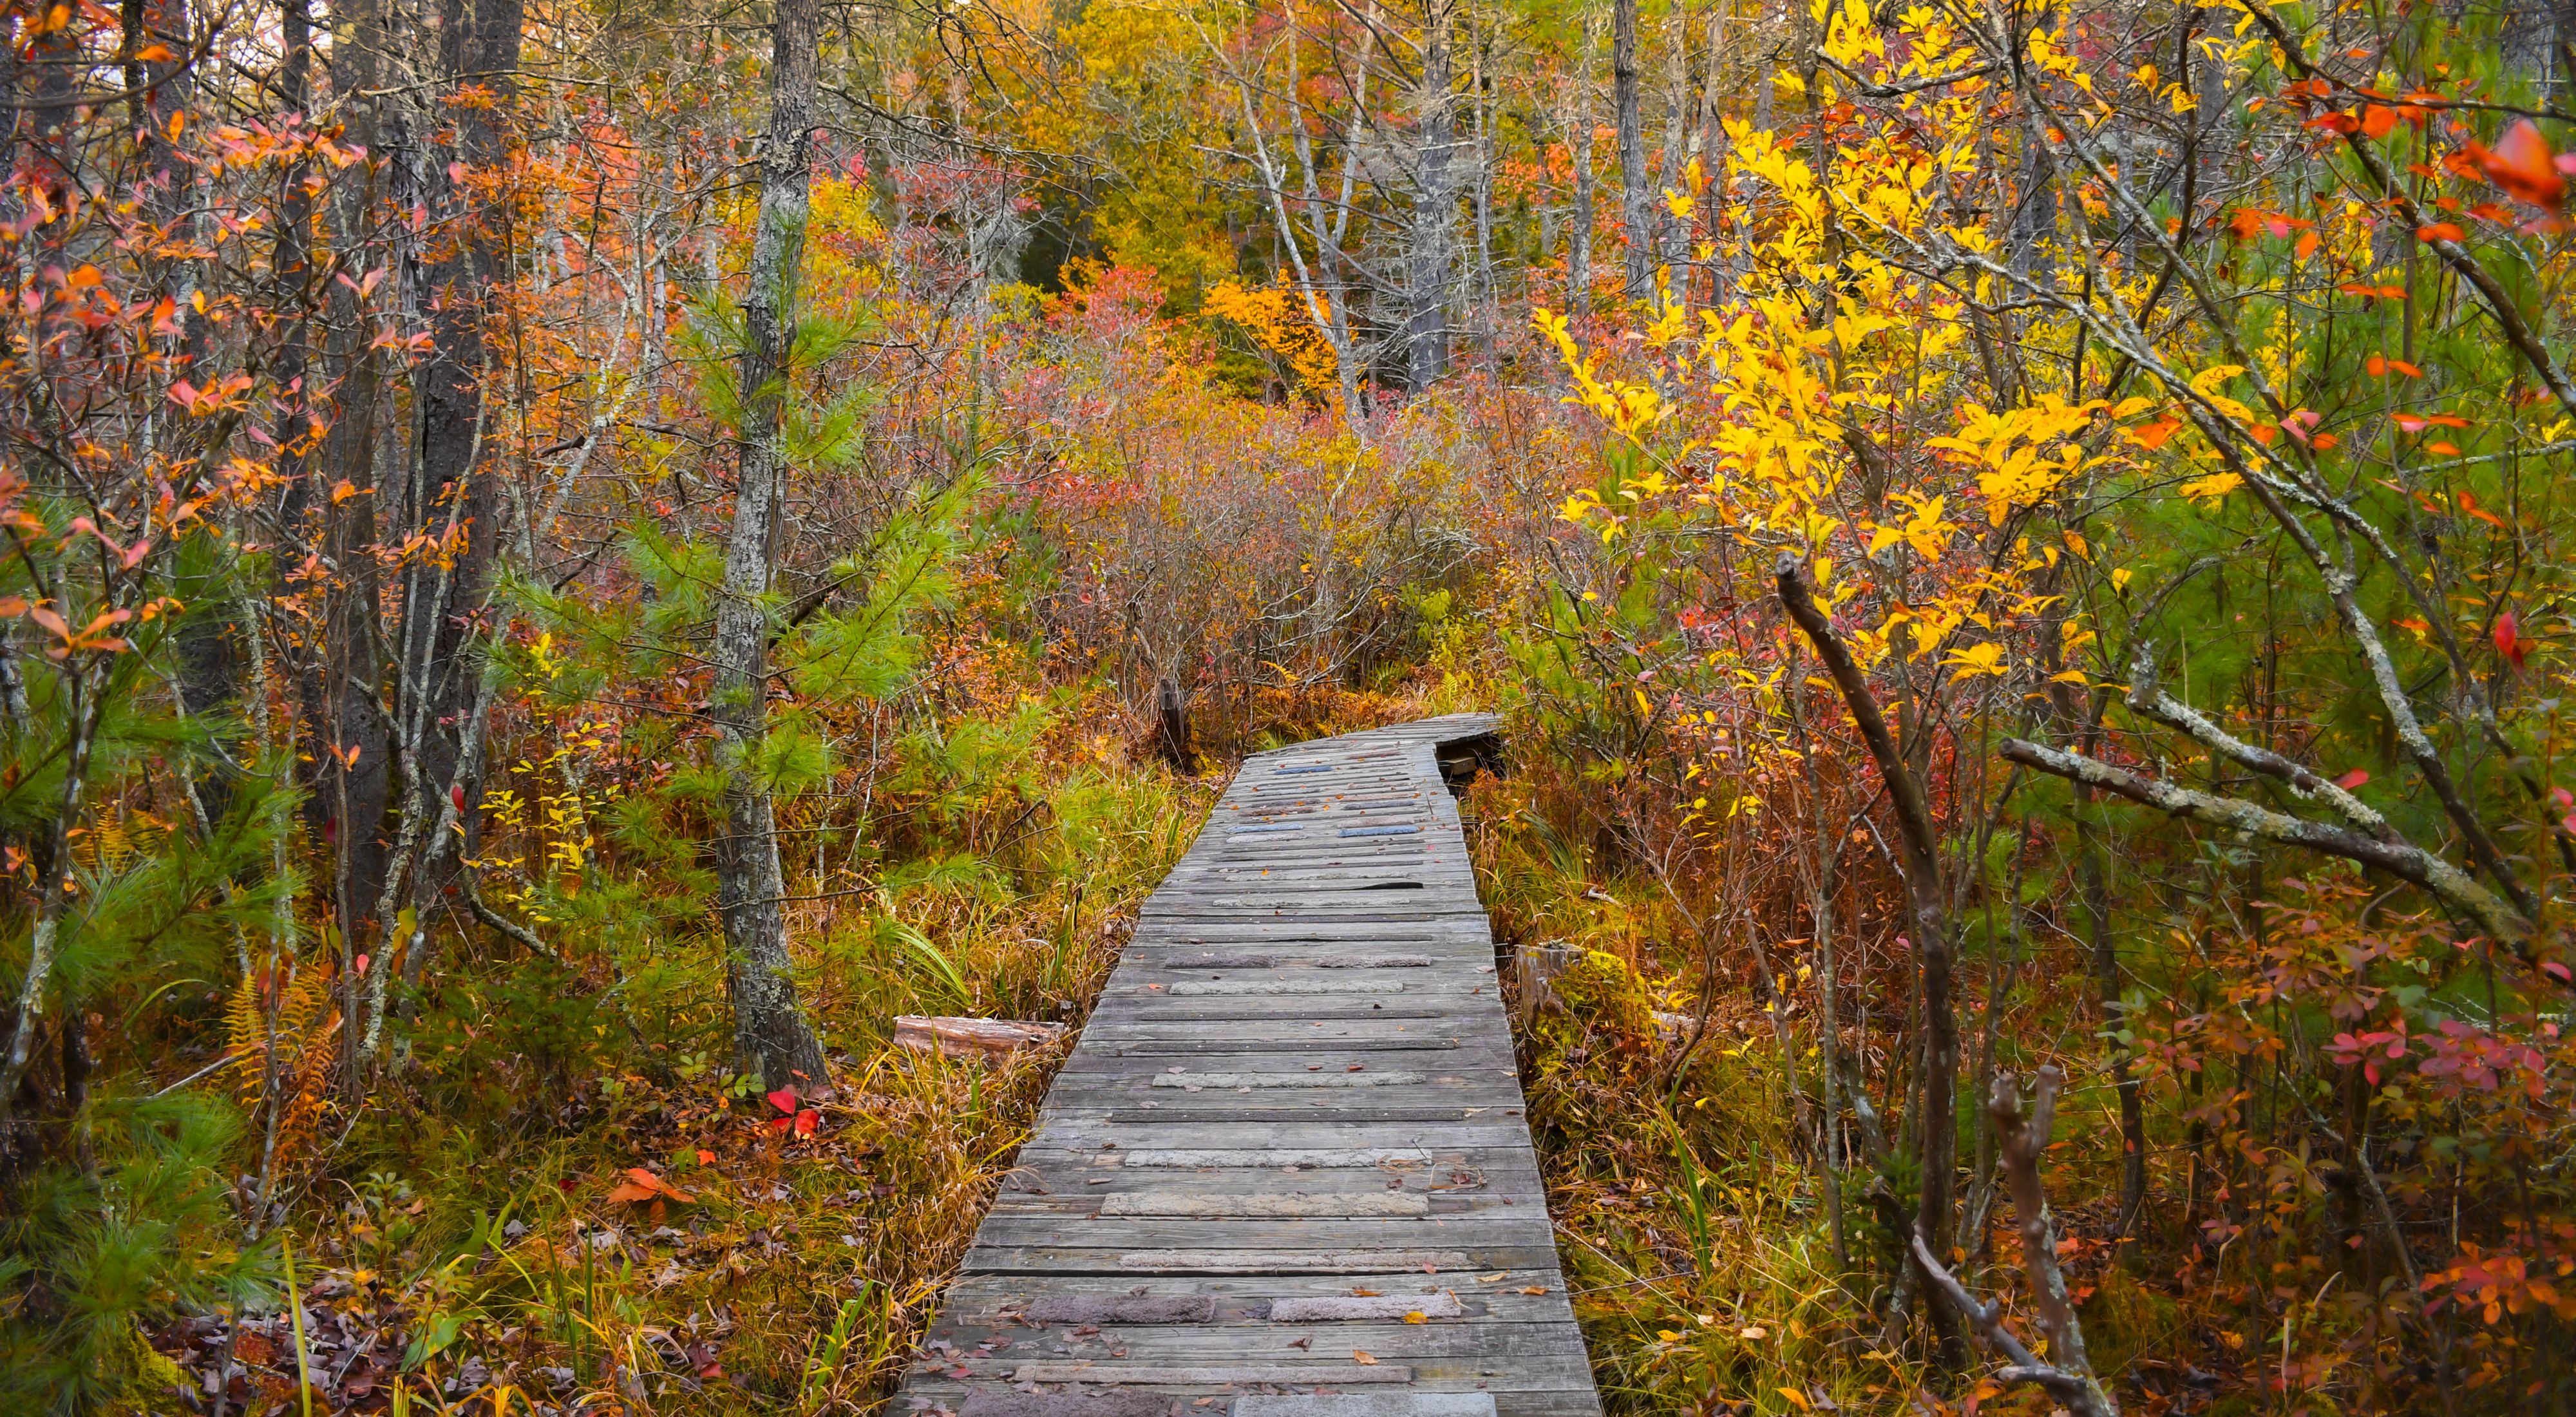 A wooden boardwalk runs through a lush forest with yellow and orange leaves.